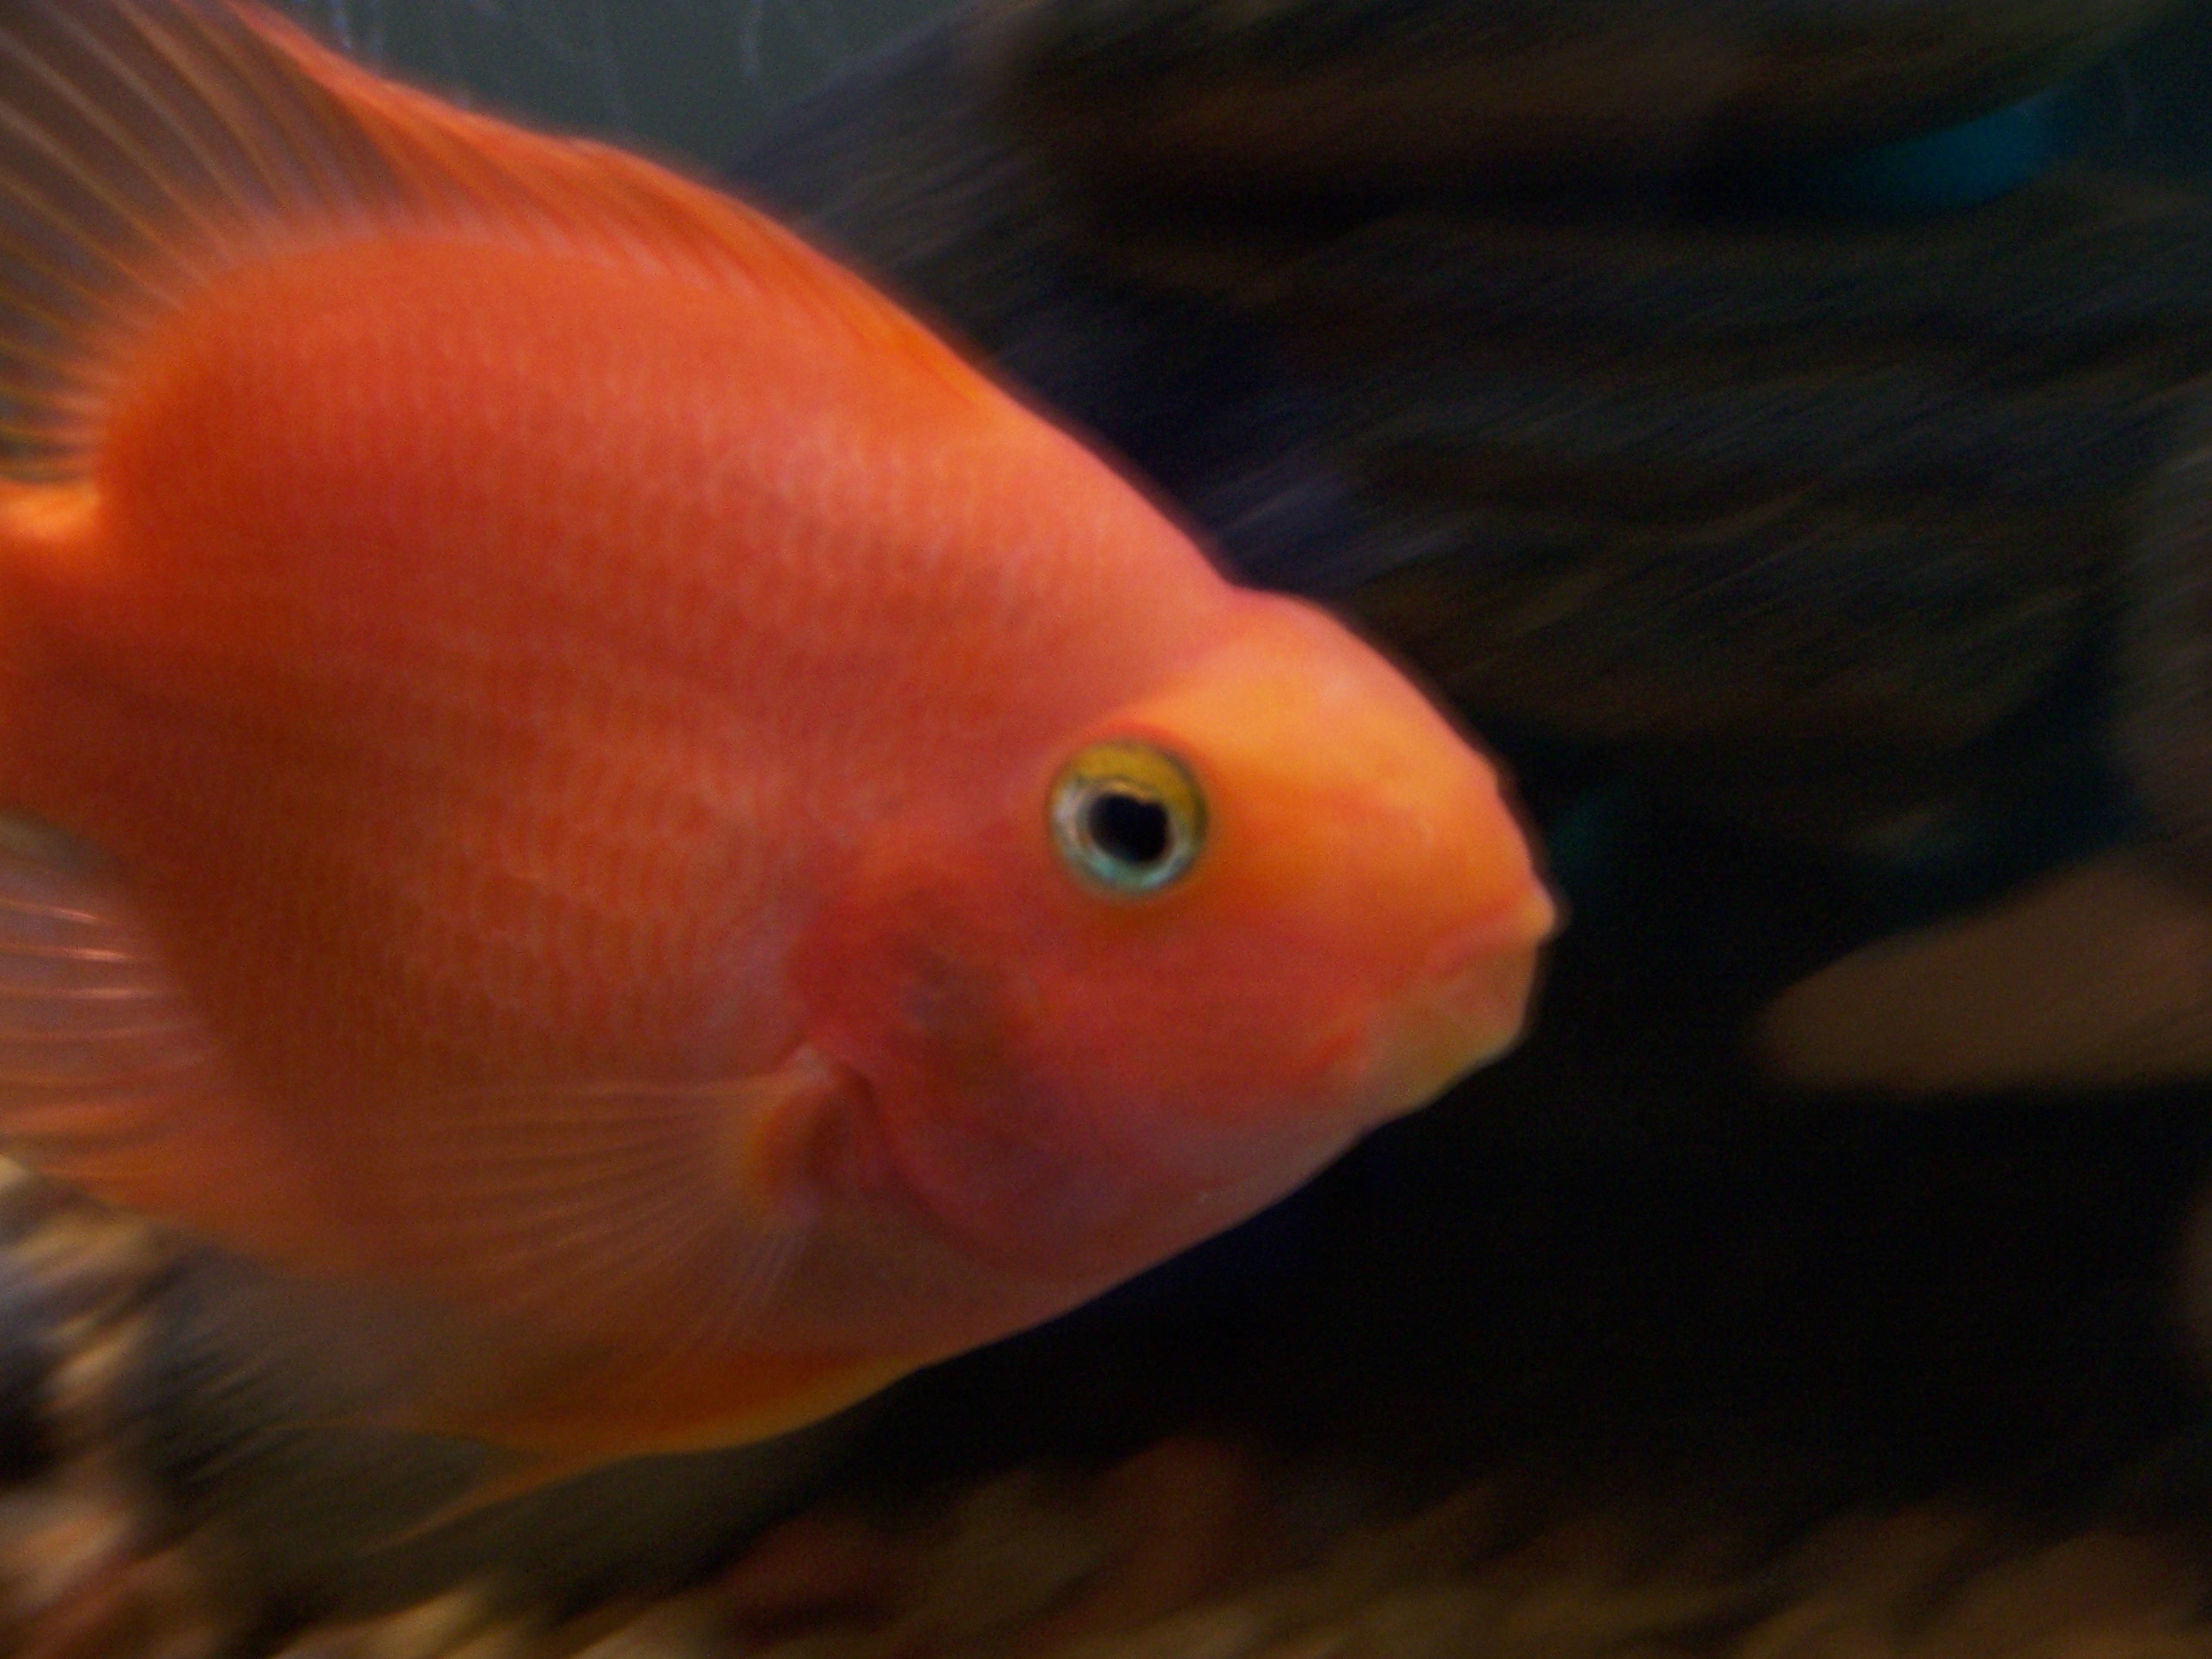 Blood parrot cichlid - Wikipedia